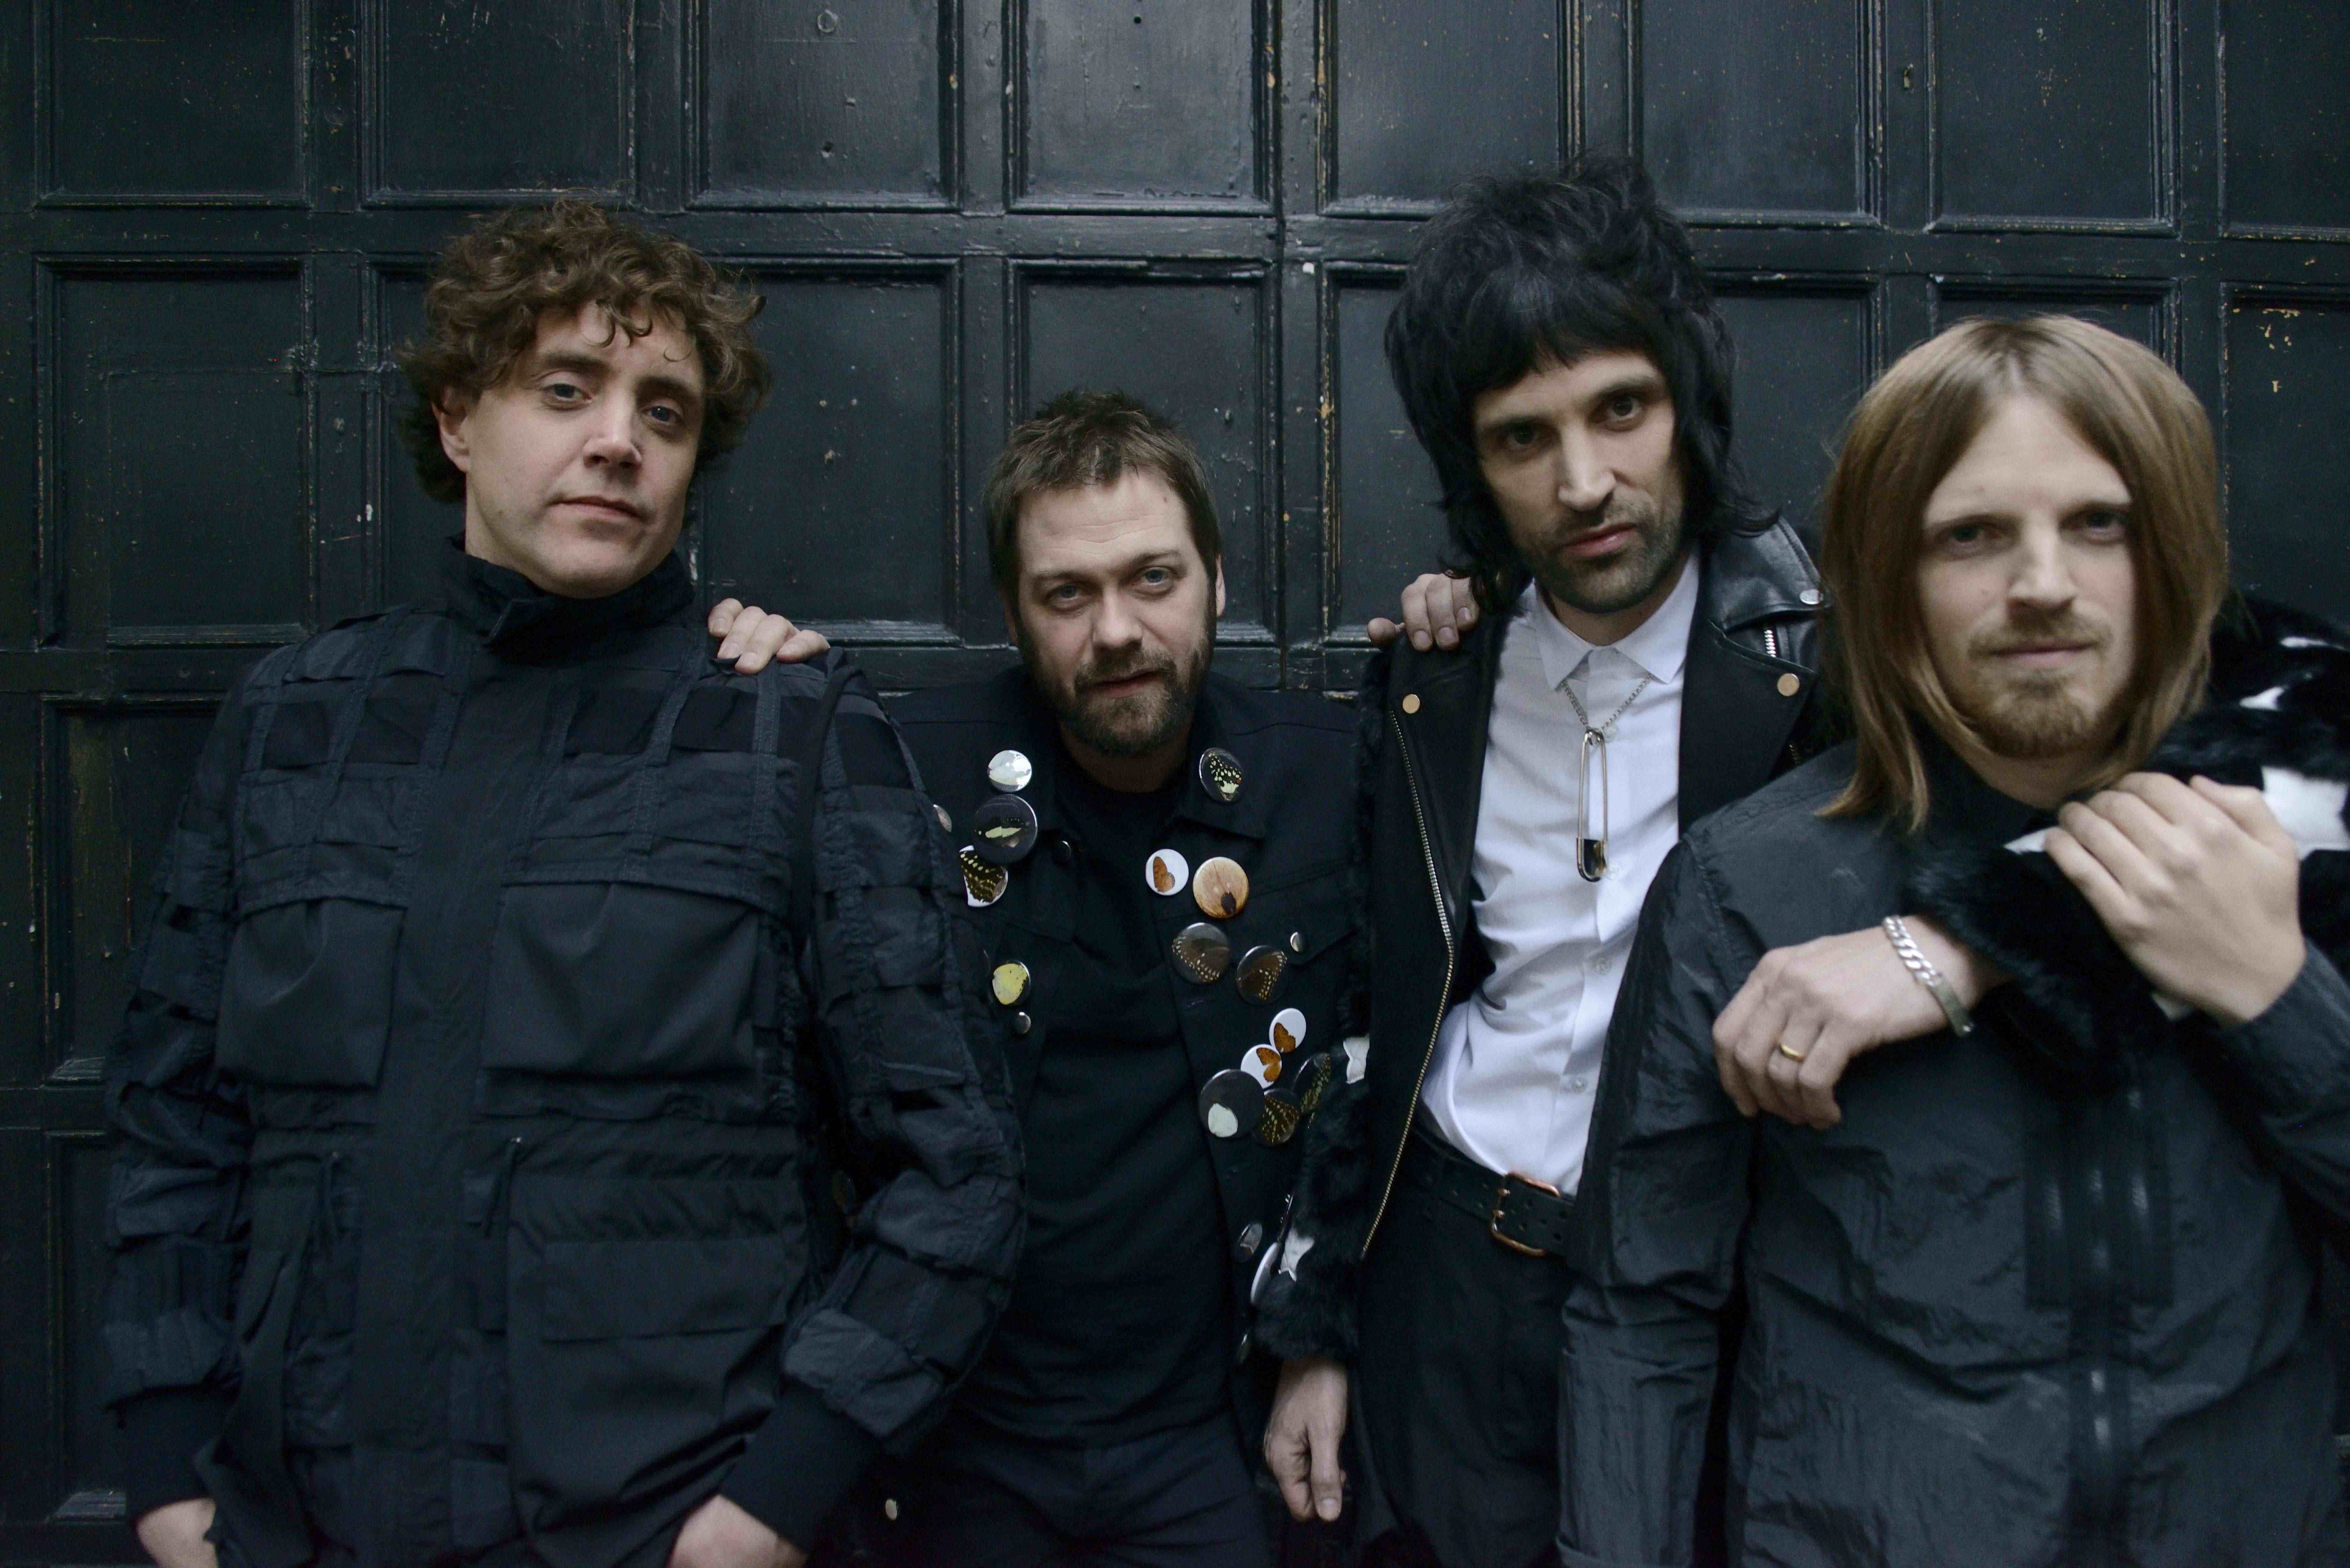 Kasabian release new single’ ‘You’re In Love With A Psycho’ and announce new album ‘For Crying Out Loud’